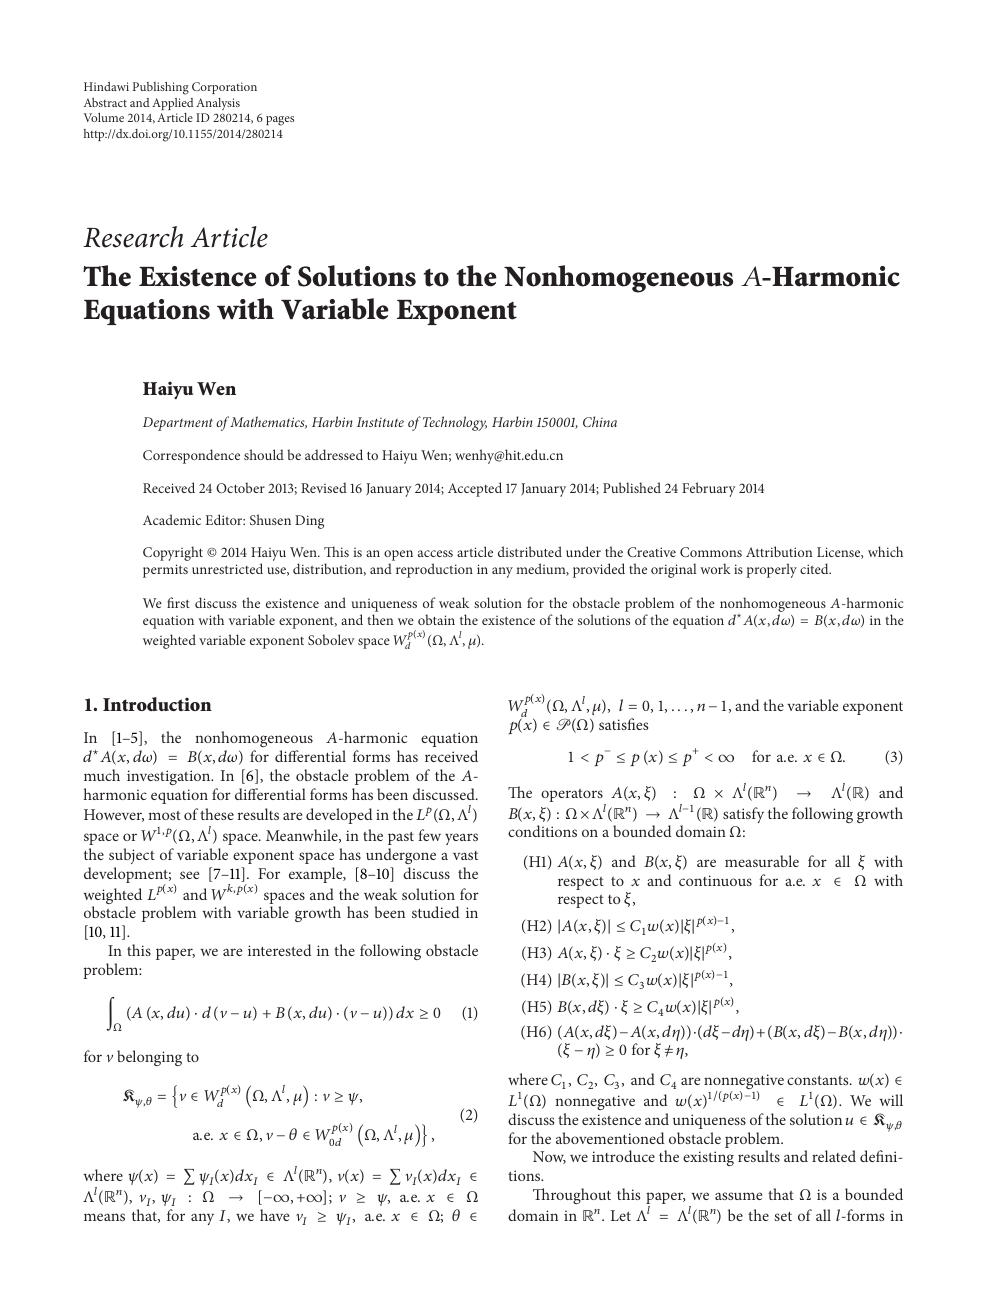 The Existence Of Solutions To The Nonhomogeneous Harmonic Equations With Variable Exponent Topic Of Research Paper In Mathematics Download Scholarly Article Pdf And Read For Free On Cyberleninka Open Science Hub